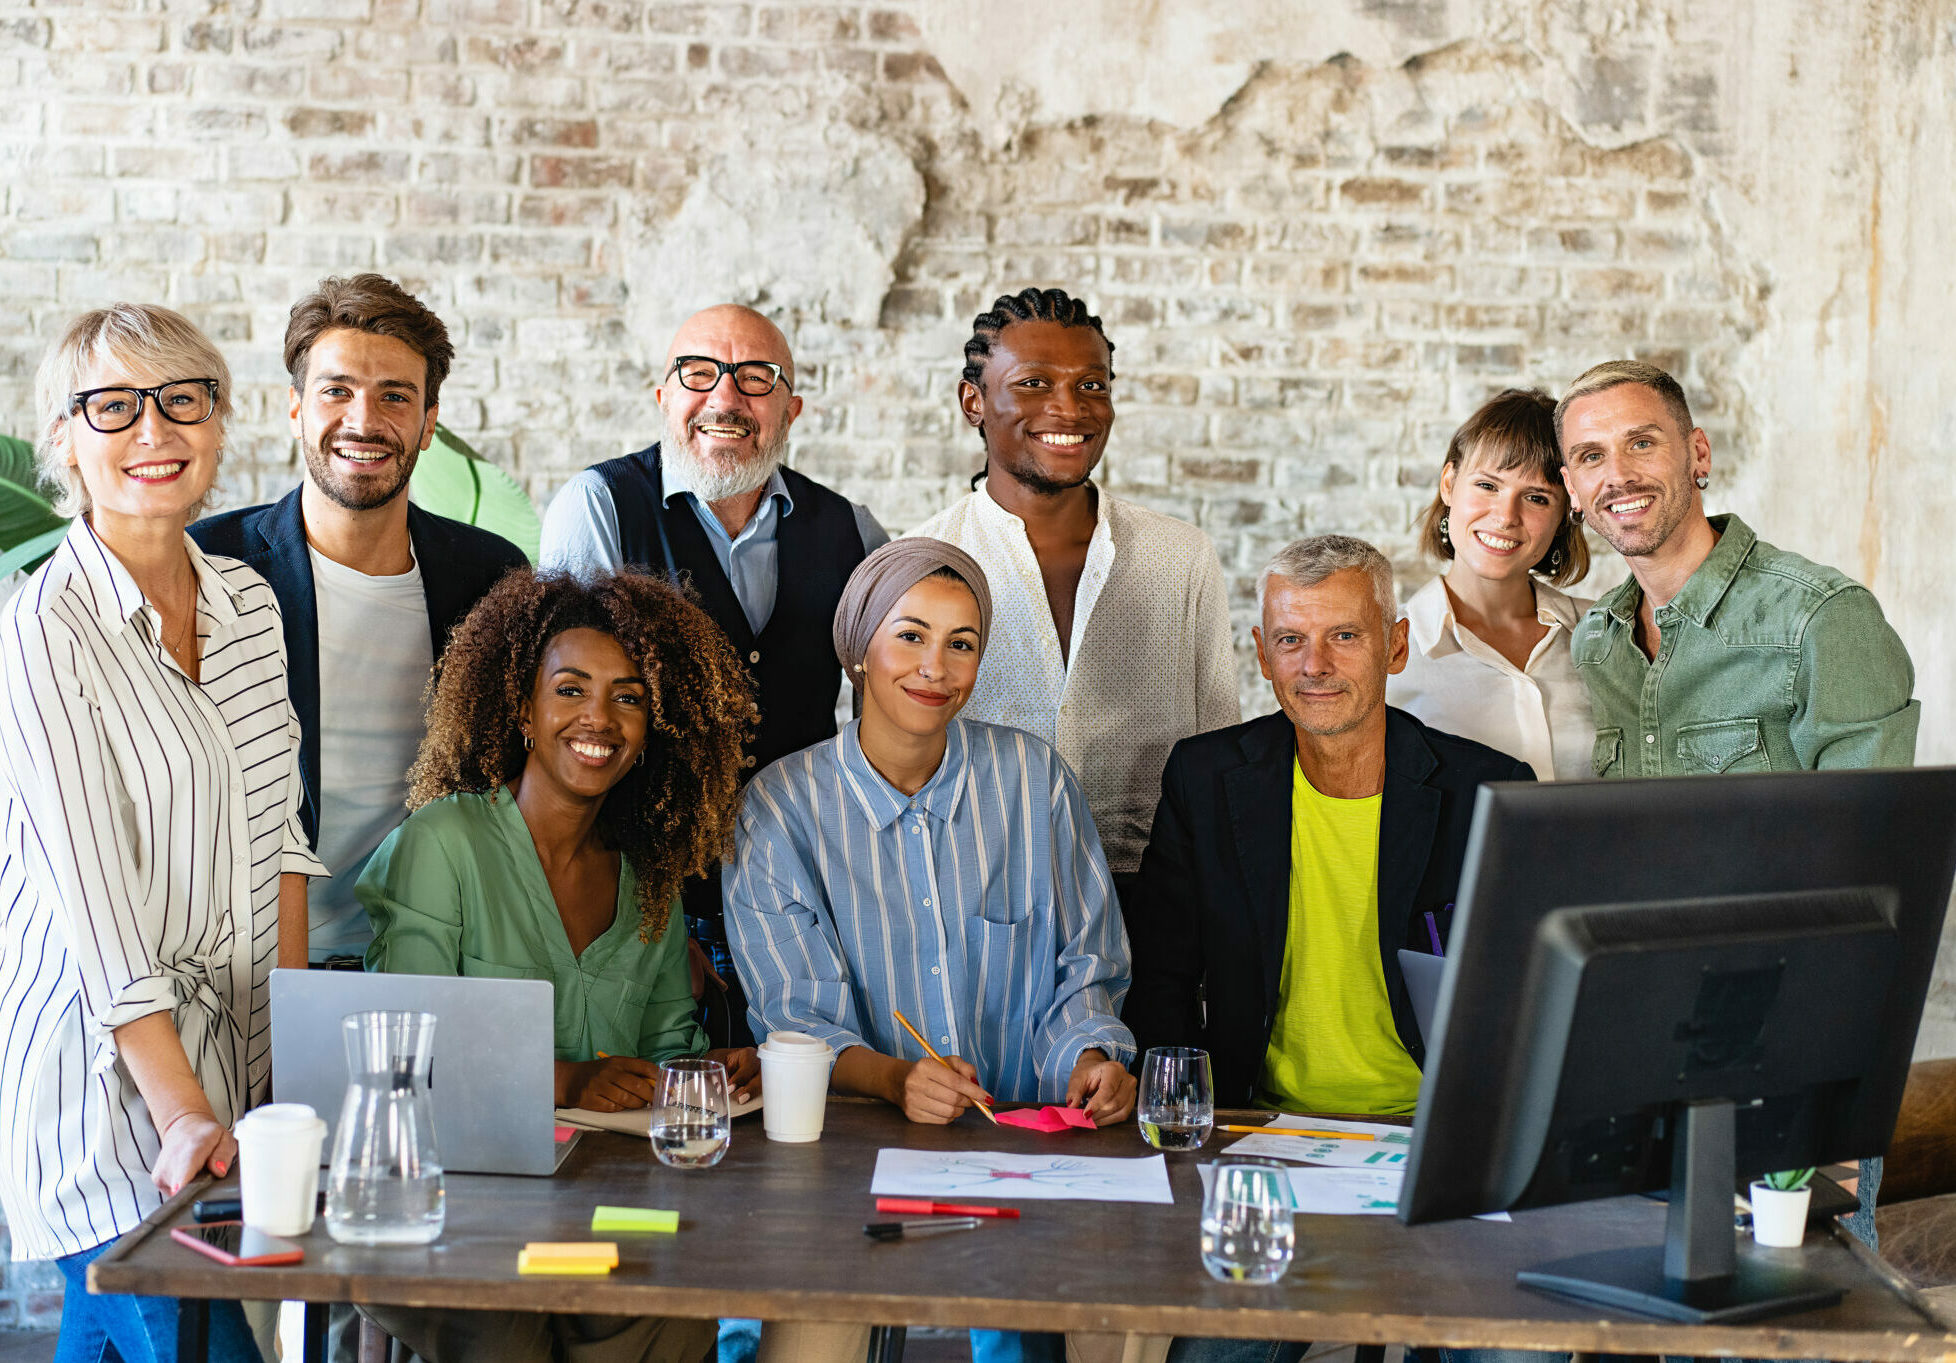 Portrait of successful group of multiethnic business people at modern office looking at camera. Portrait of happy creative team of satisfied businesspeople standing as a team. Multiracial group of people smiling.